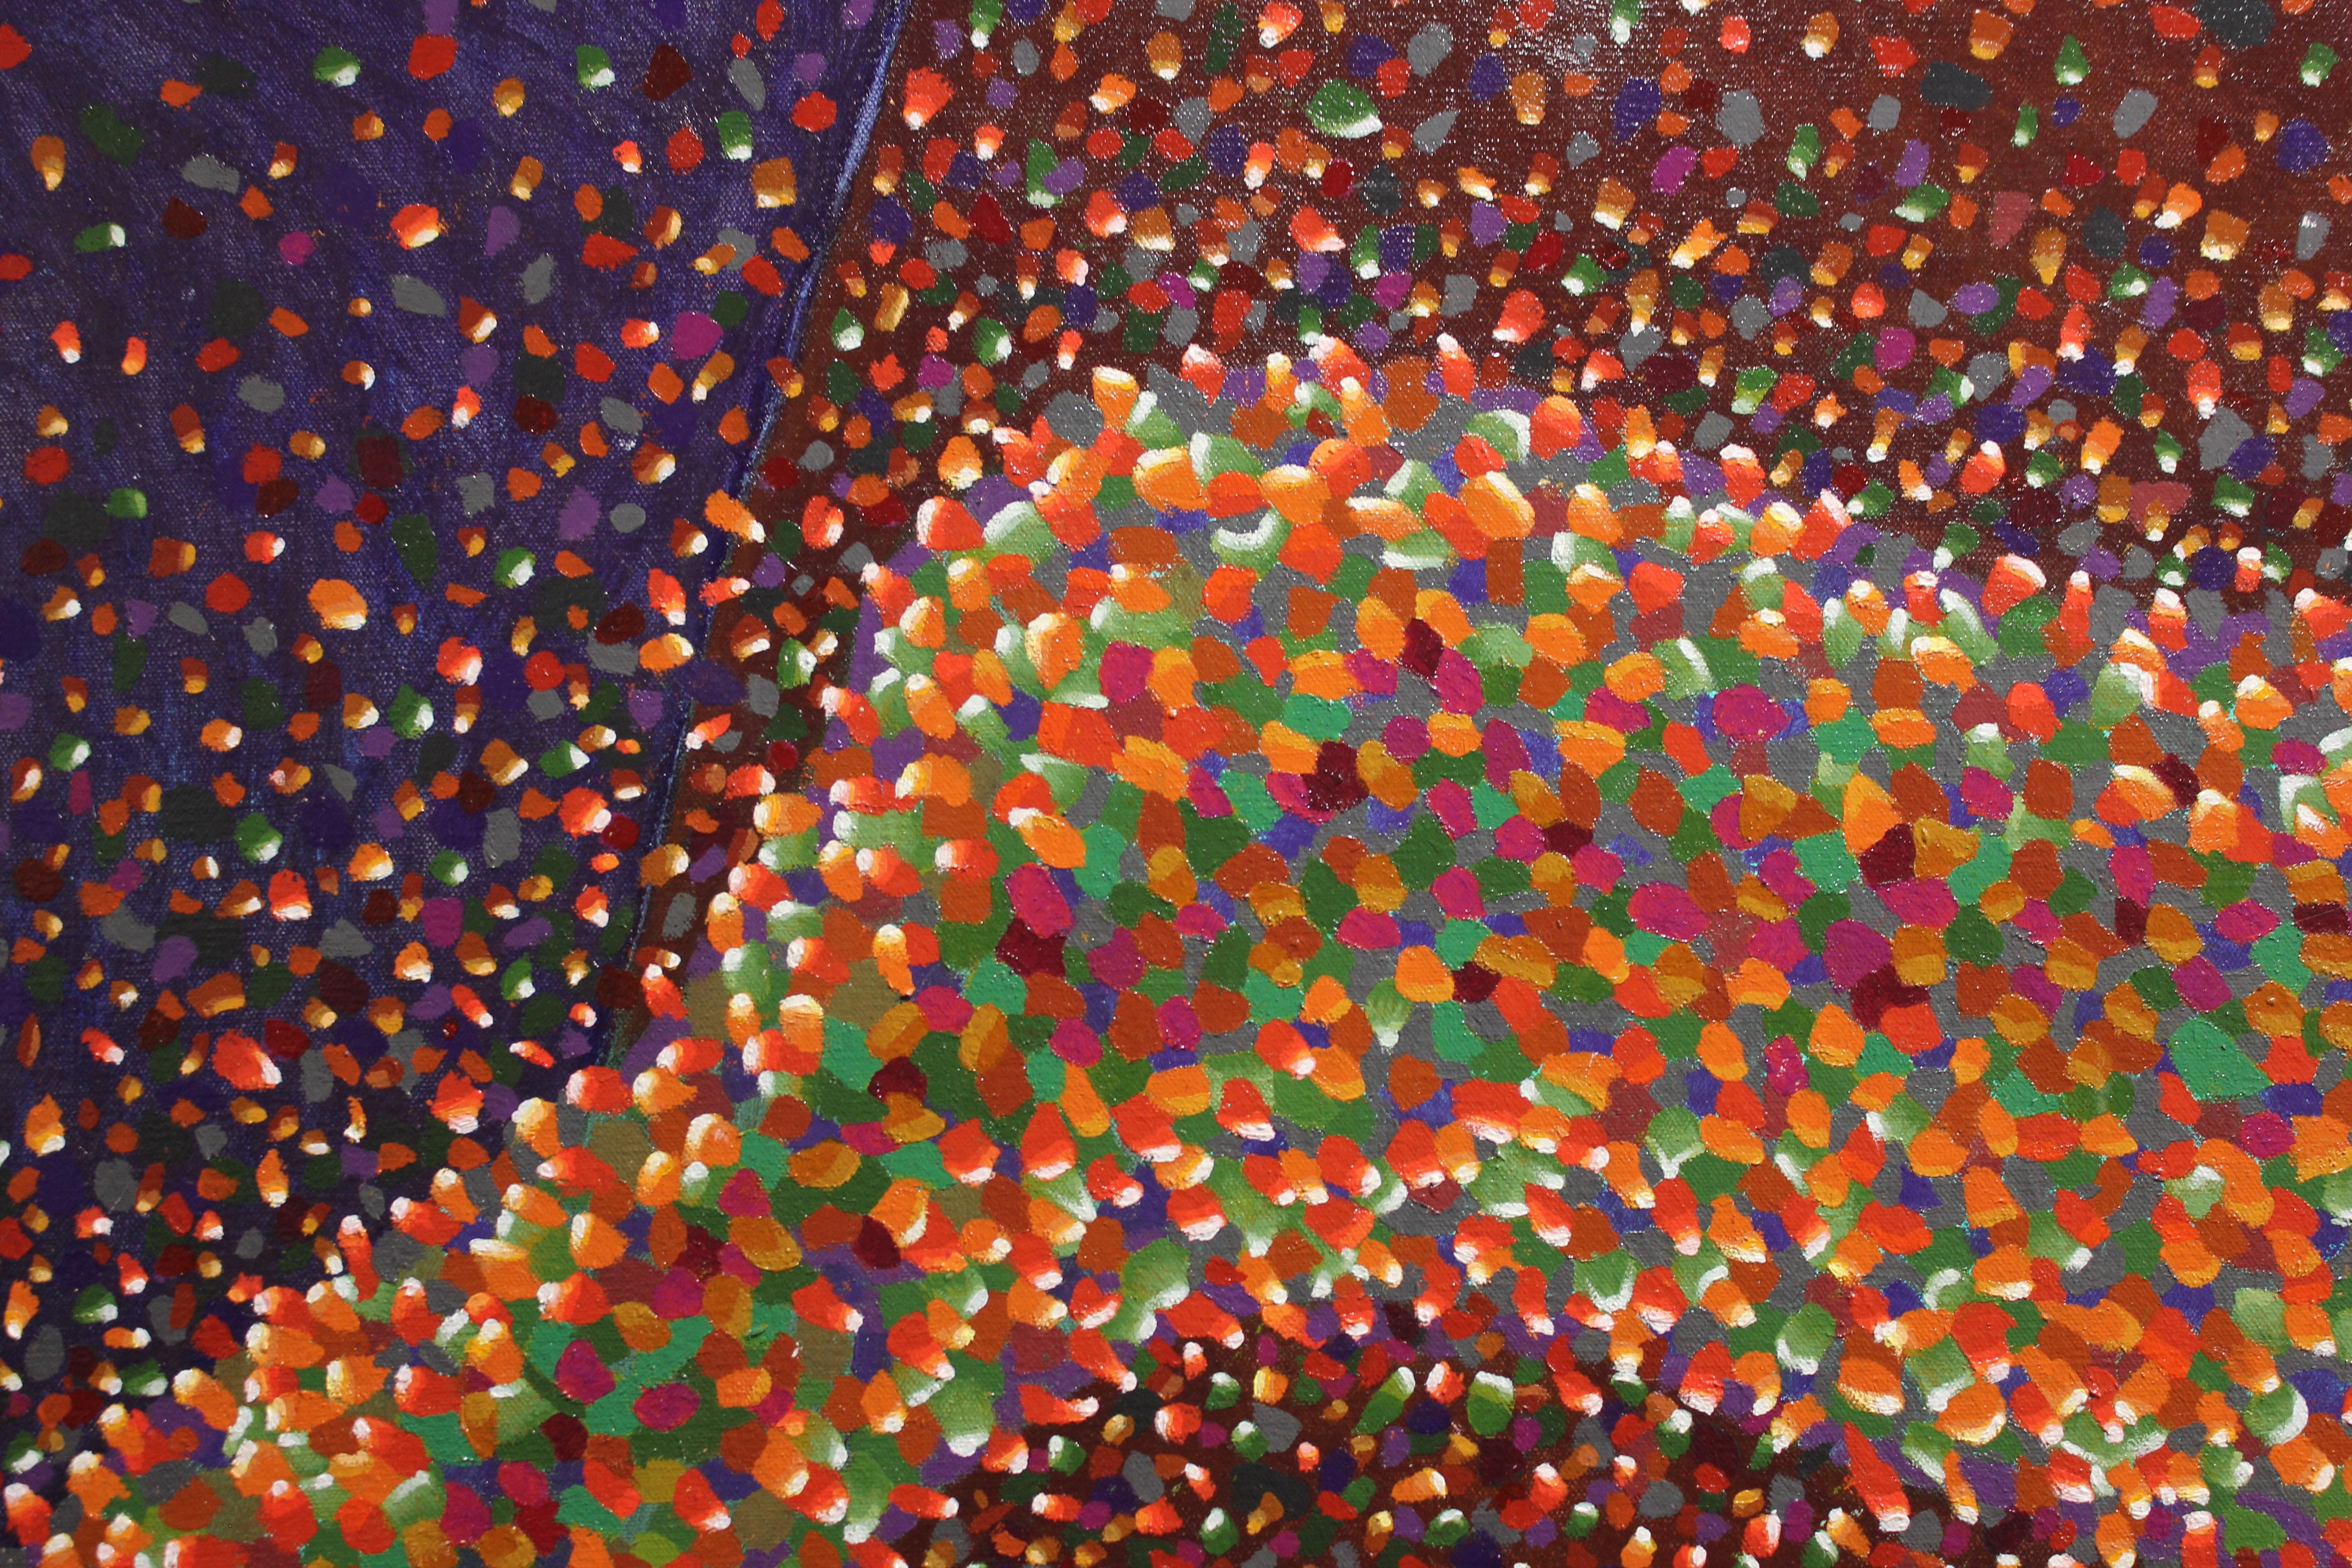 Pointillist Abstract with Deep Purples and Reds - Abstract Expressionist Painting by John Sturtevant